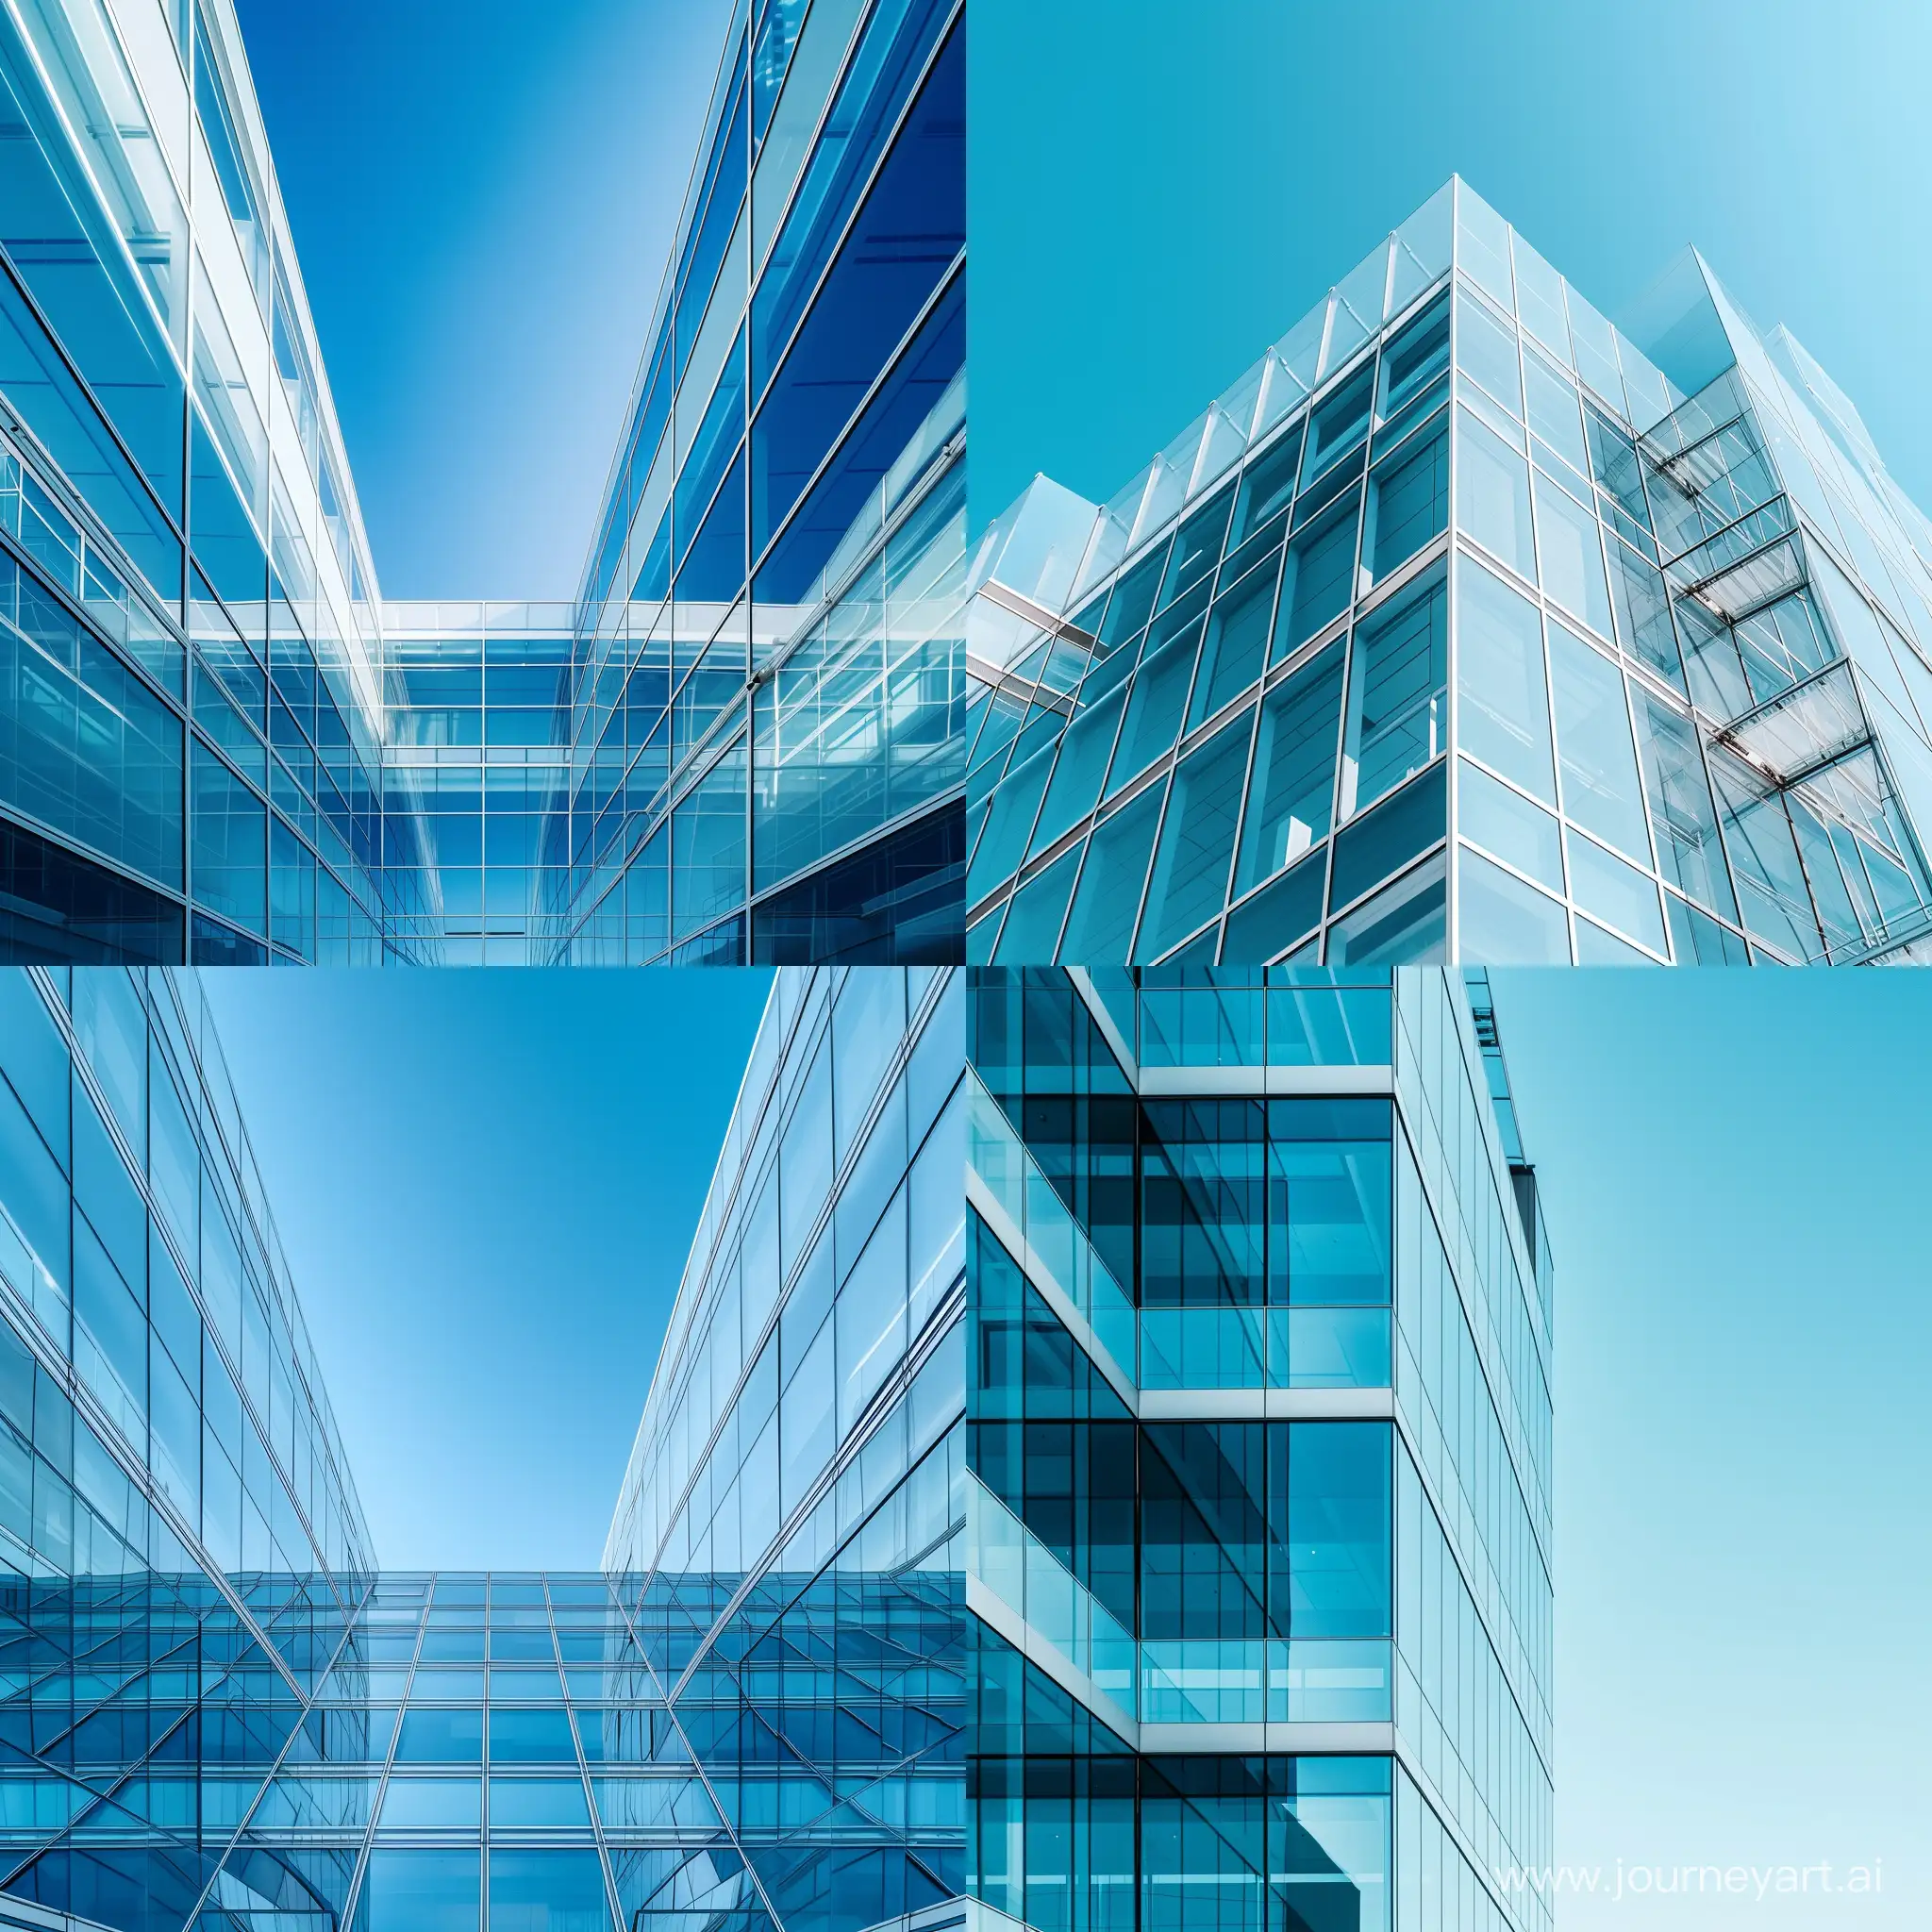 futuristic and modern building with glass walls, blue sky